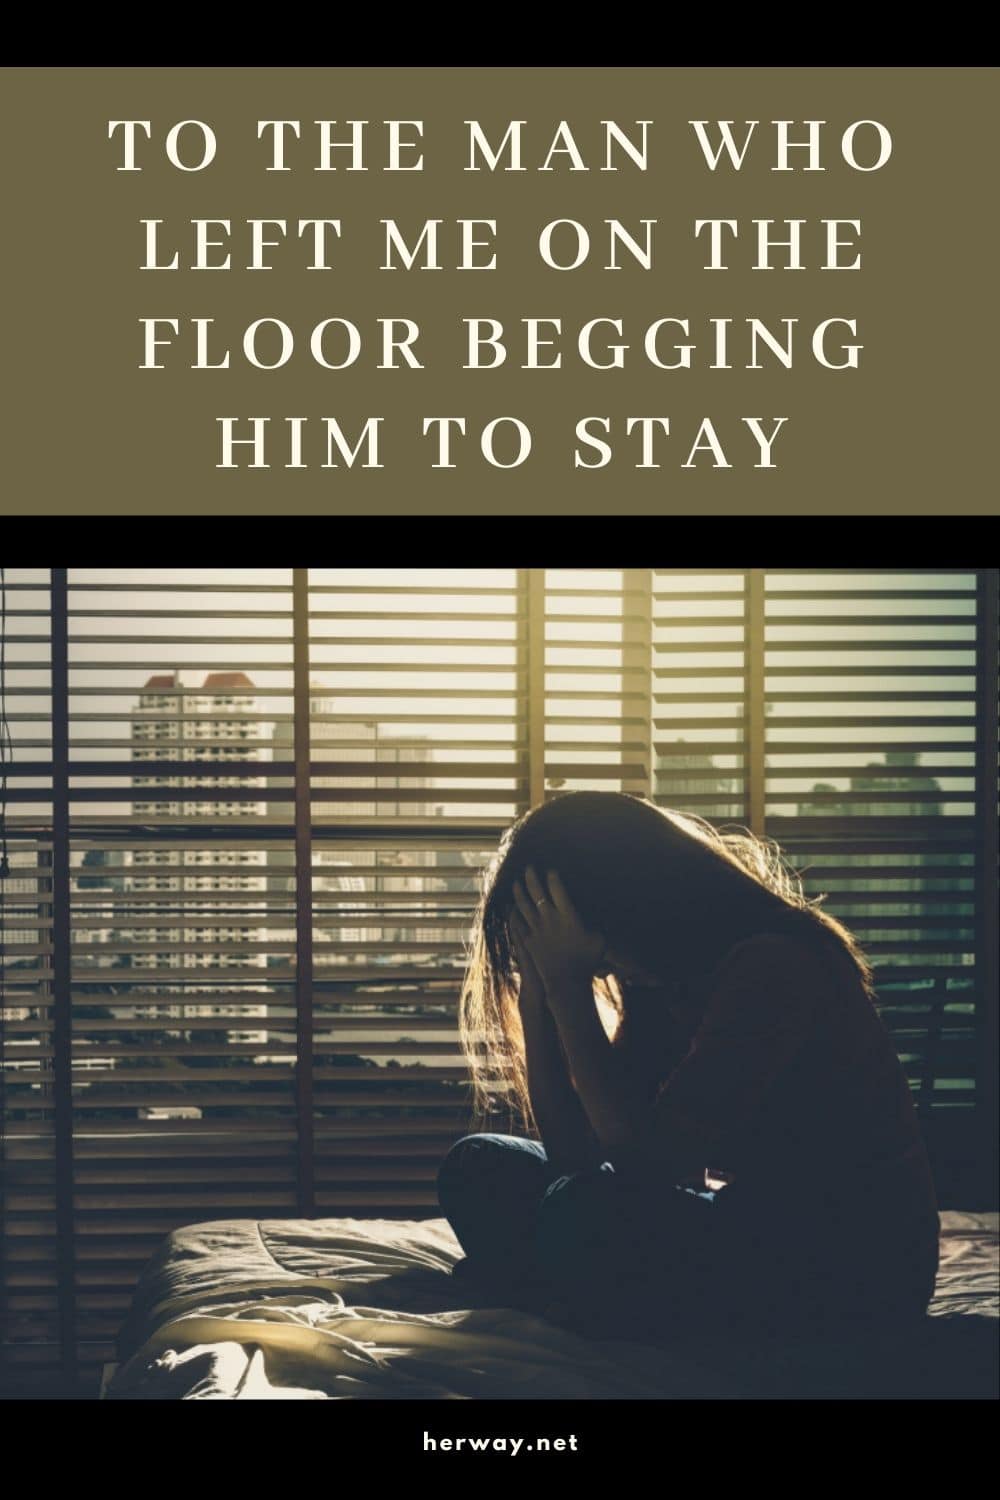 To The Man Who Left Me On The Floor Begging Him To Stay